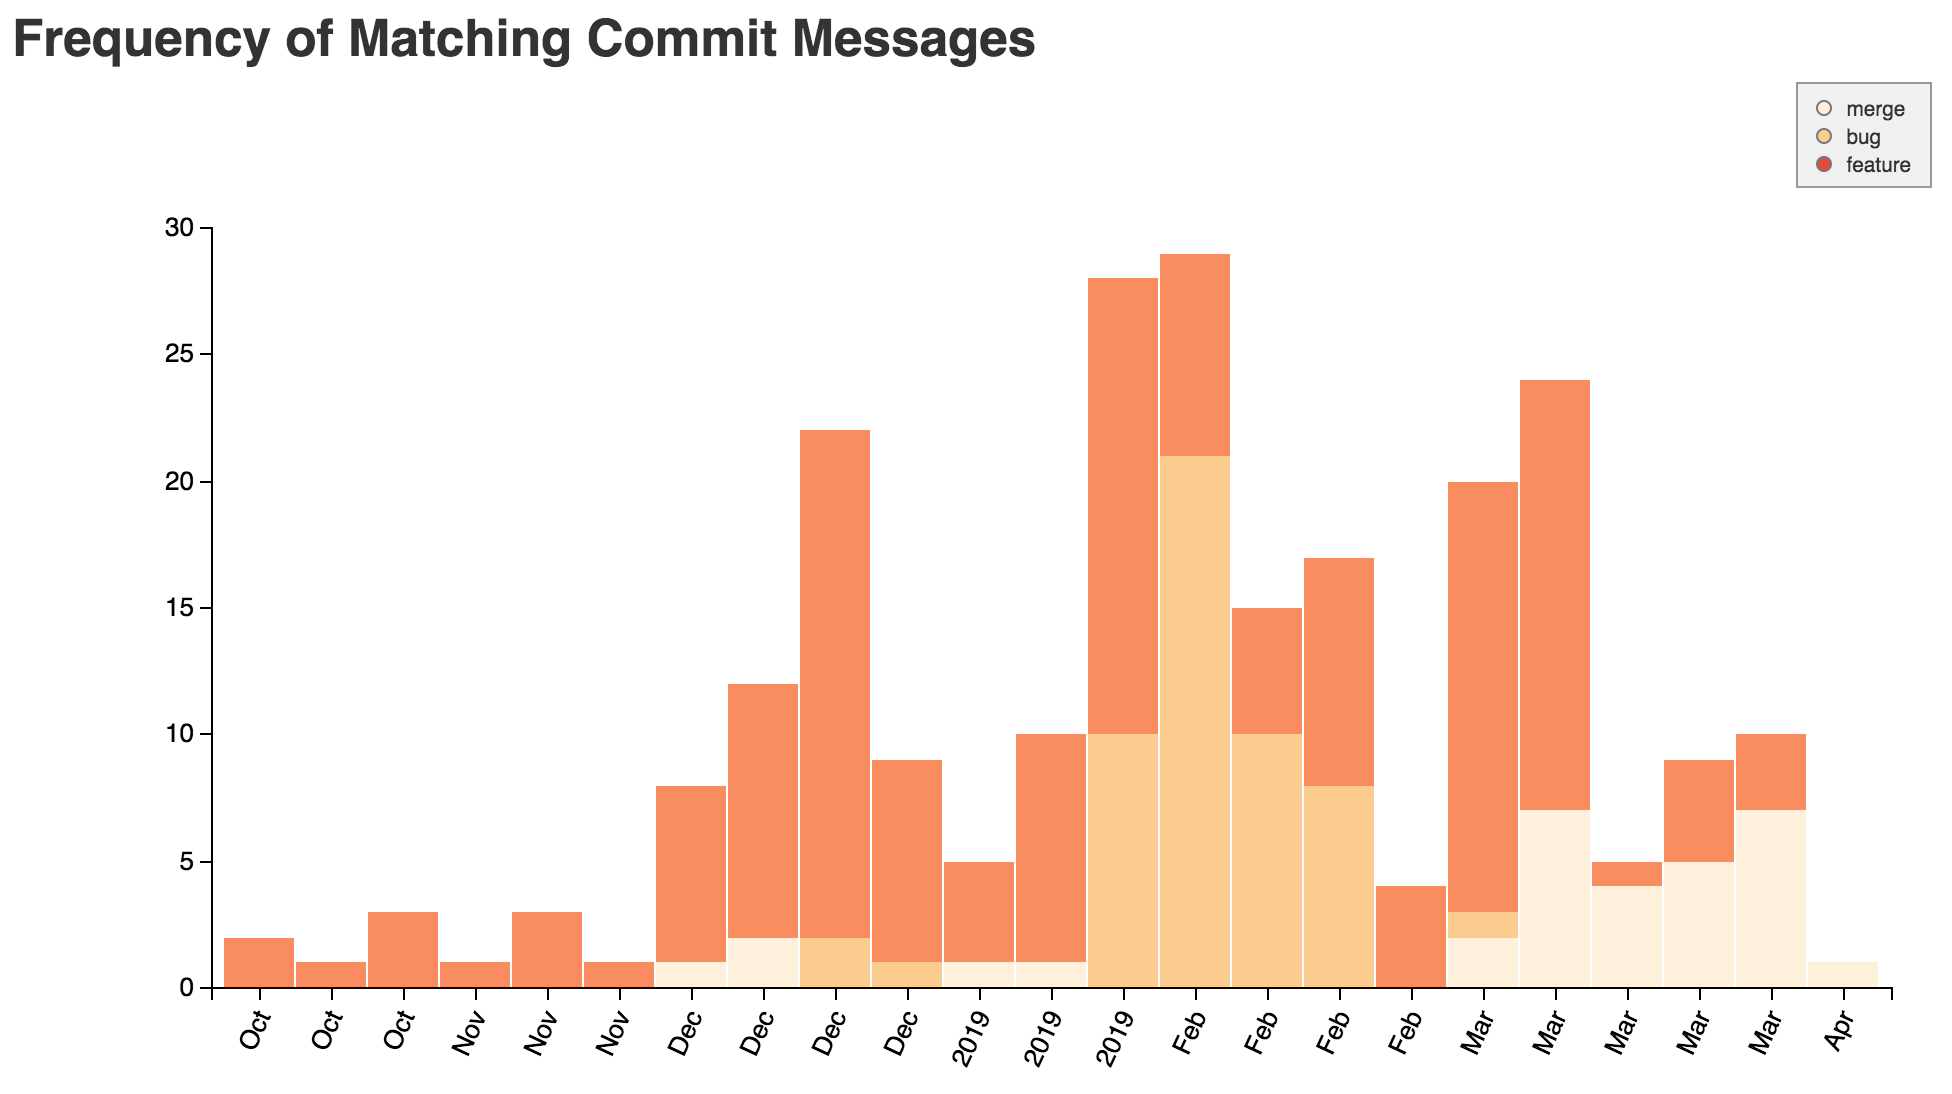 A commit message trend